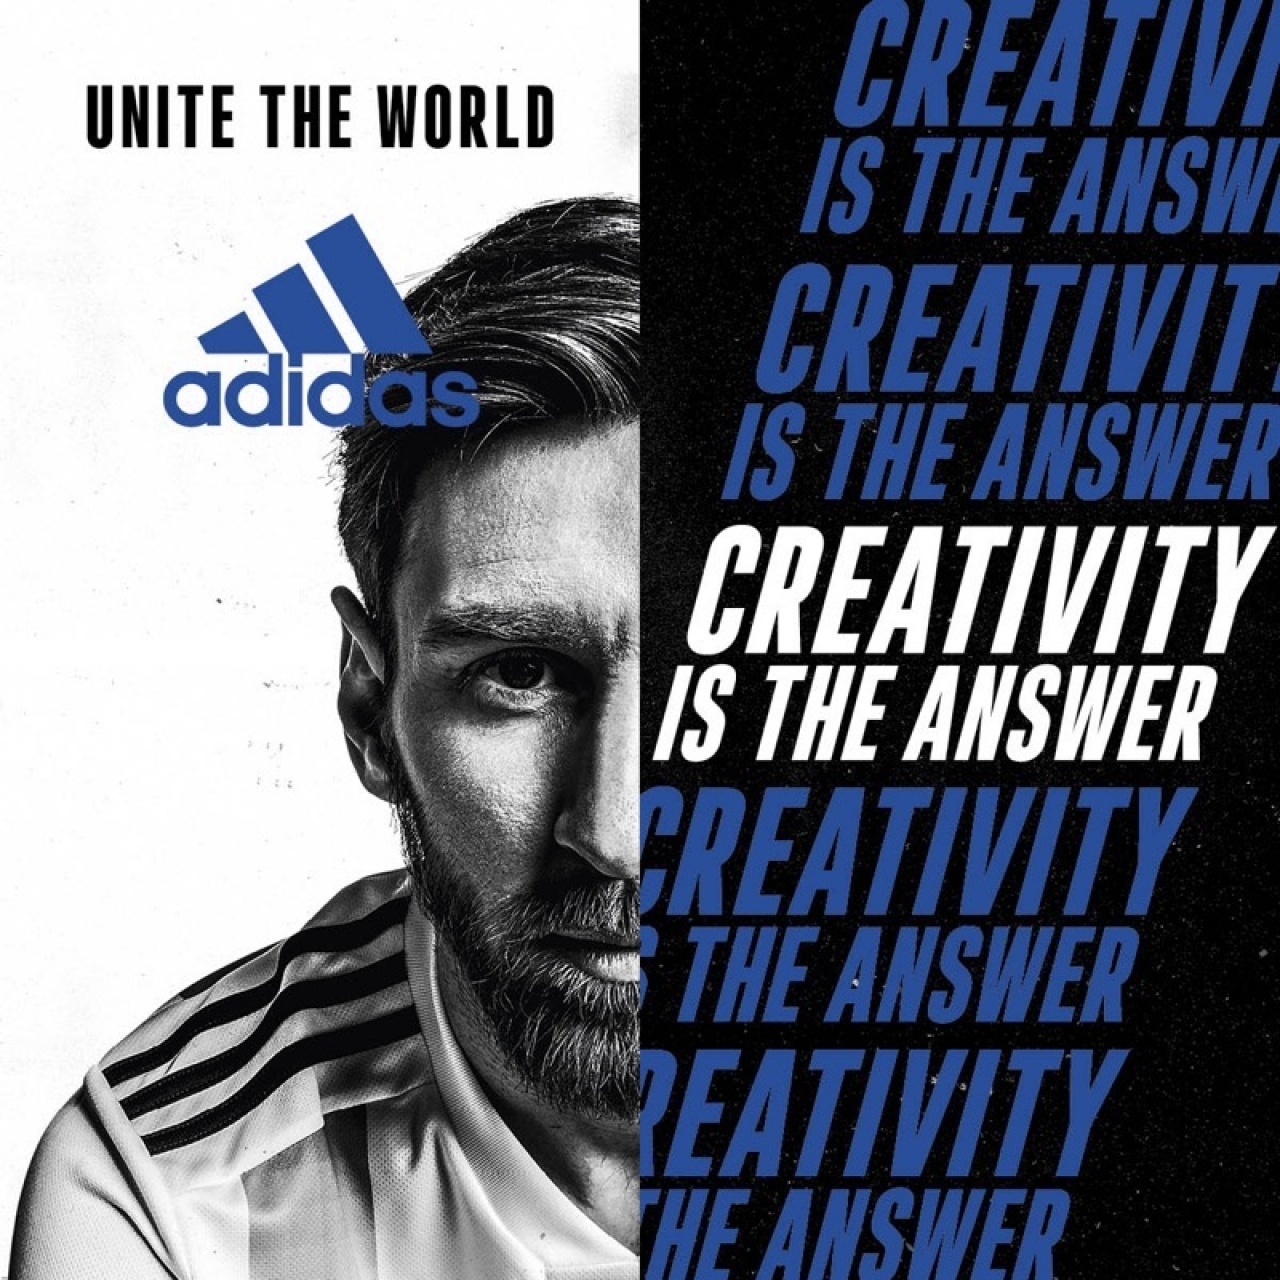 Creativity is the Answer\